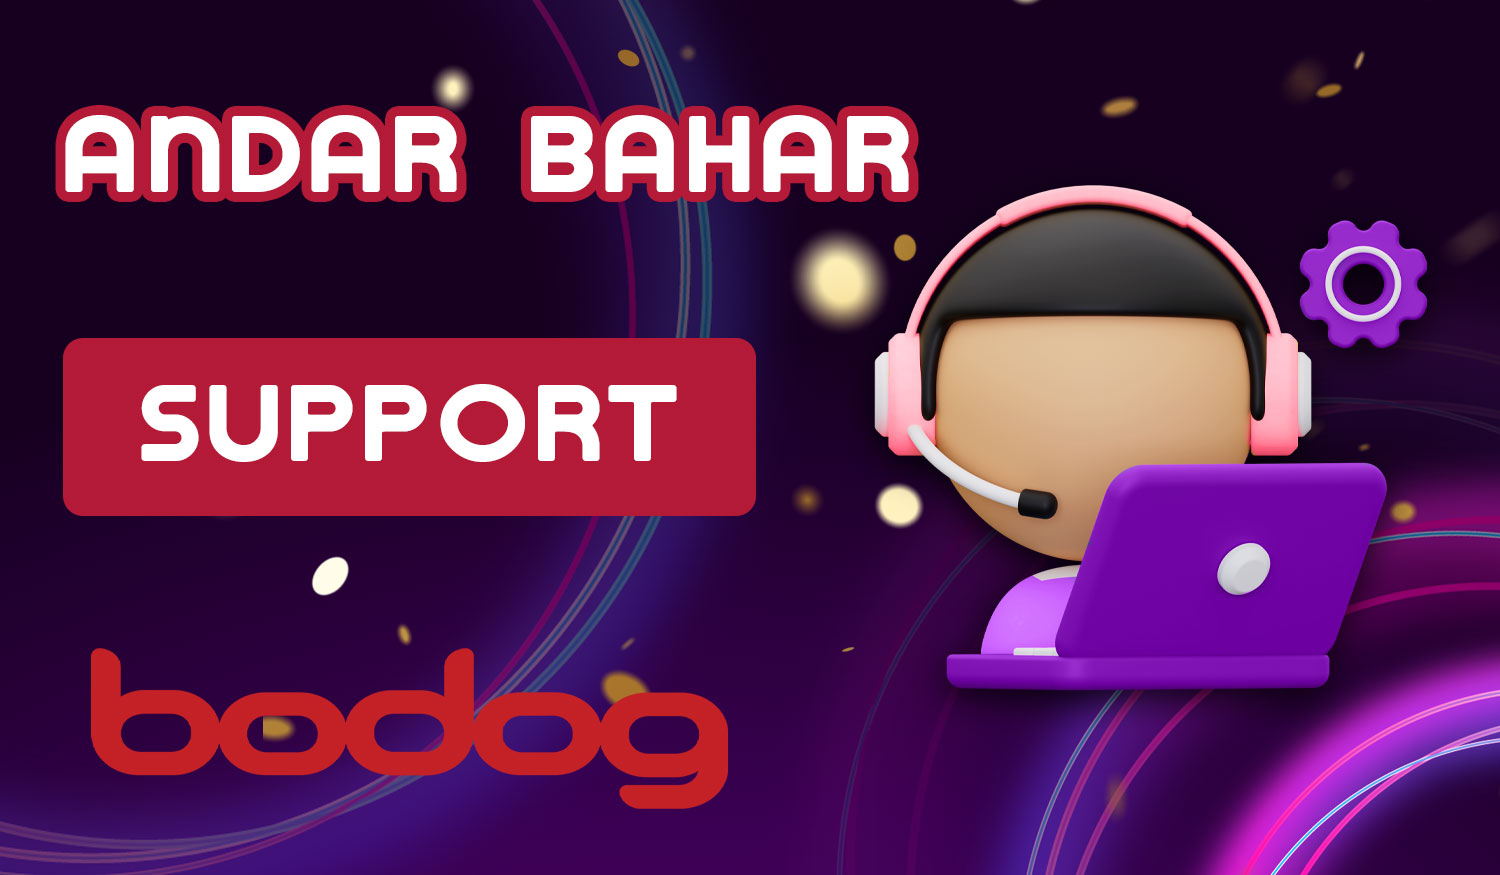 Bodog India provides player support through online chat, email and Telegram bot